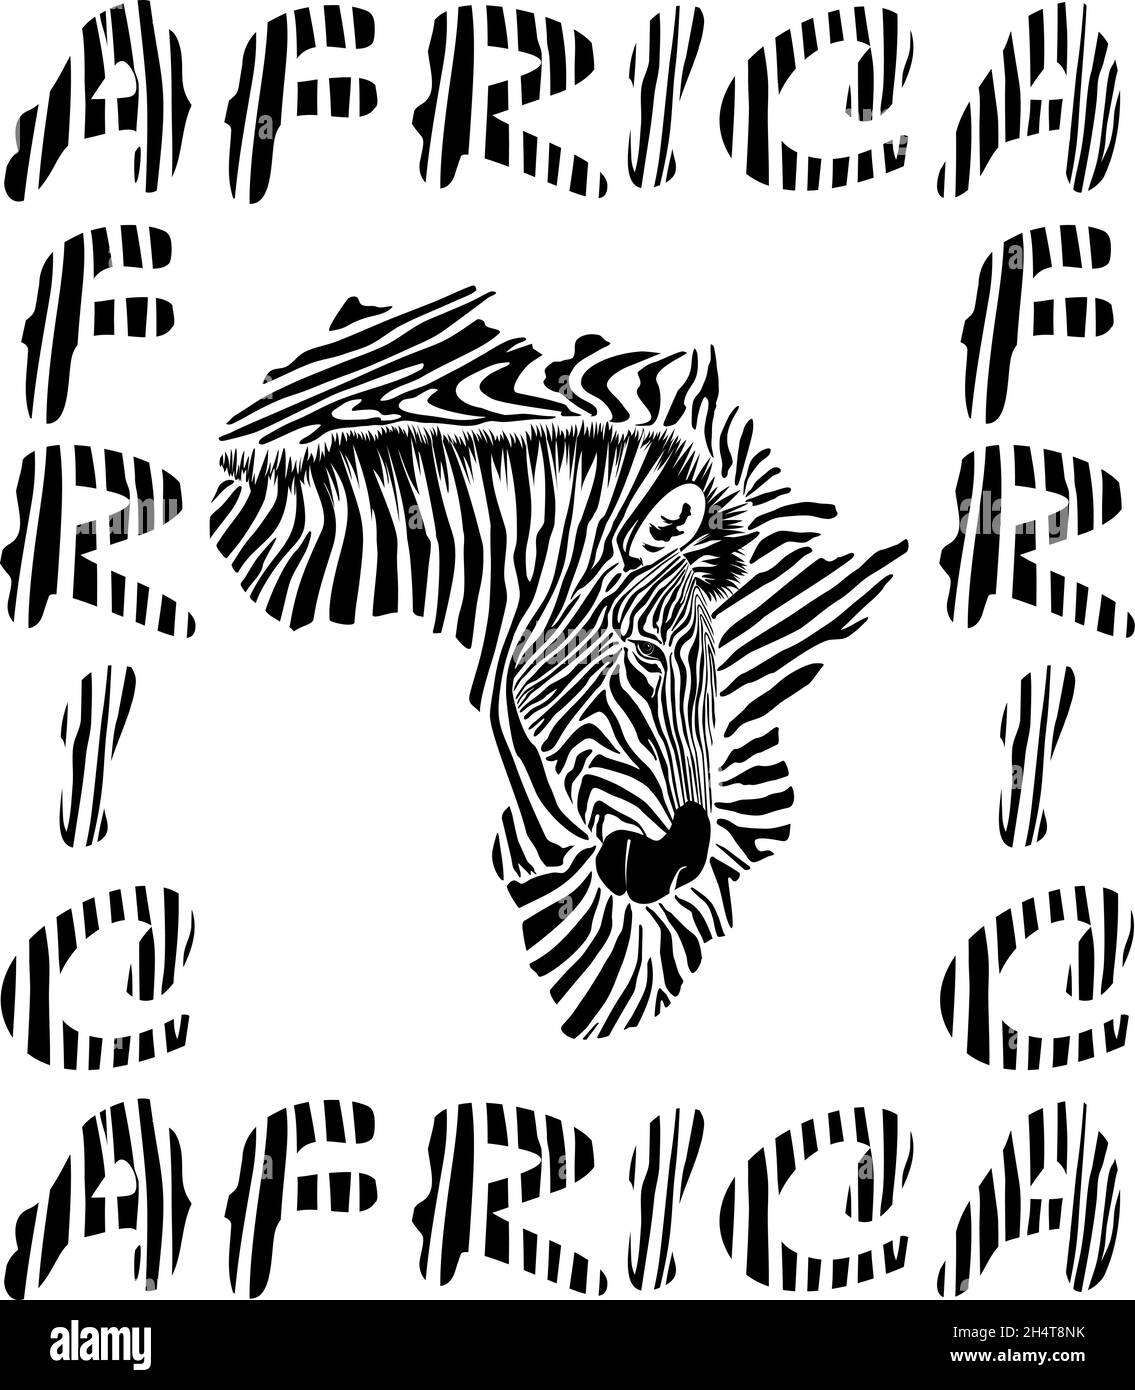 Africa map, background with text, head and zebra texture Stock Vector